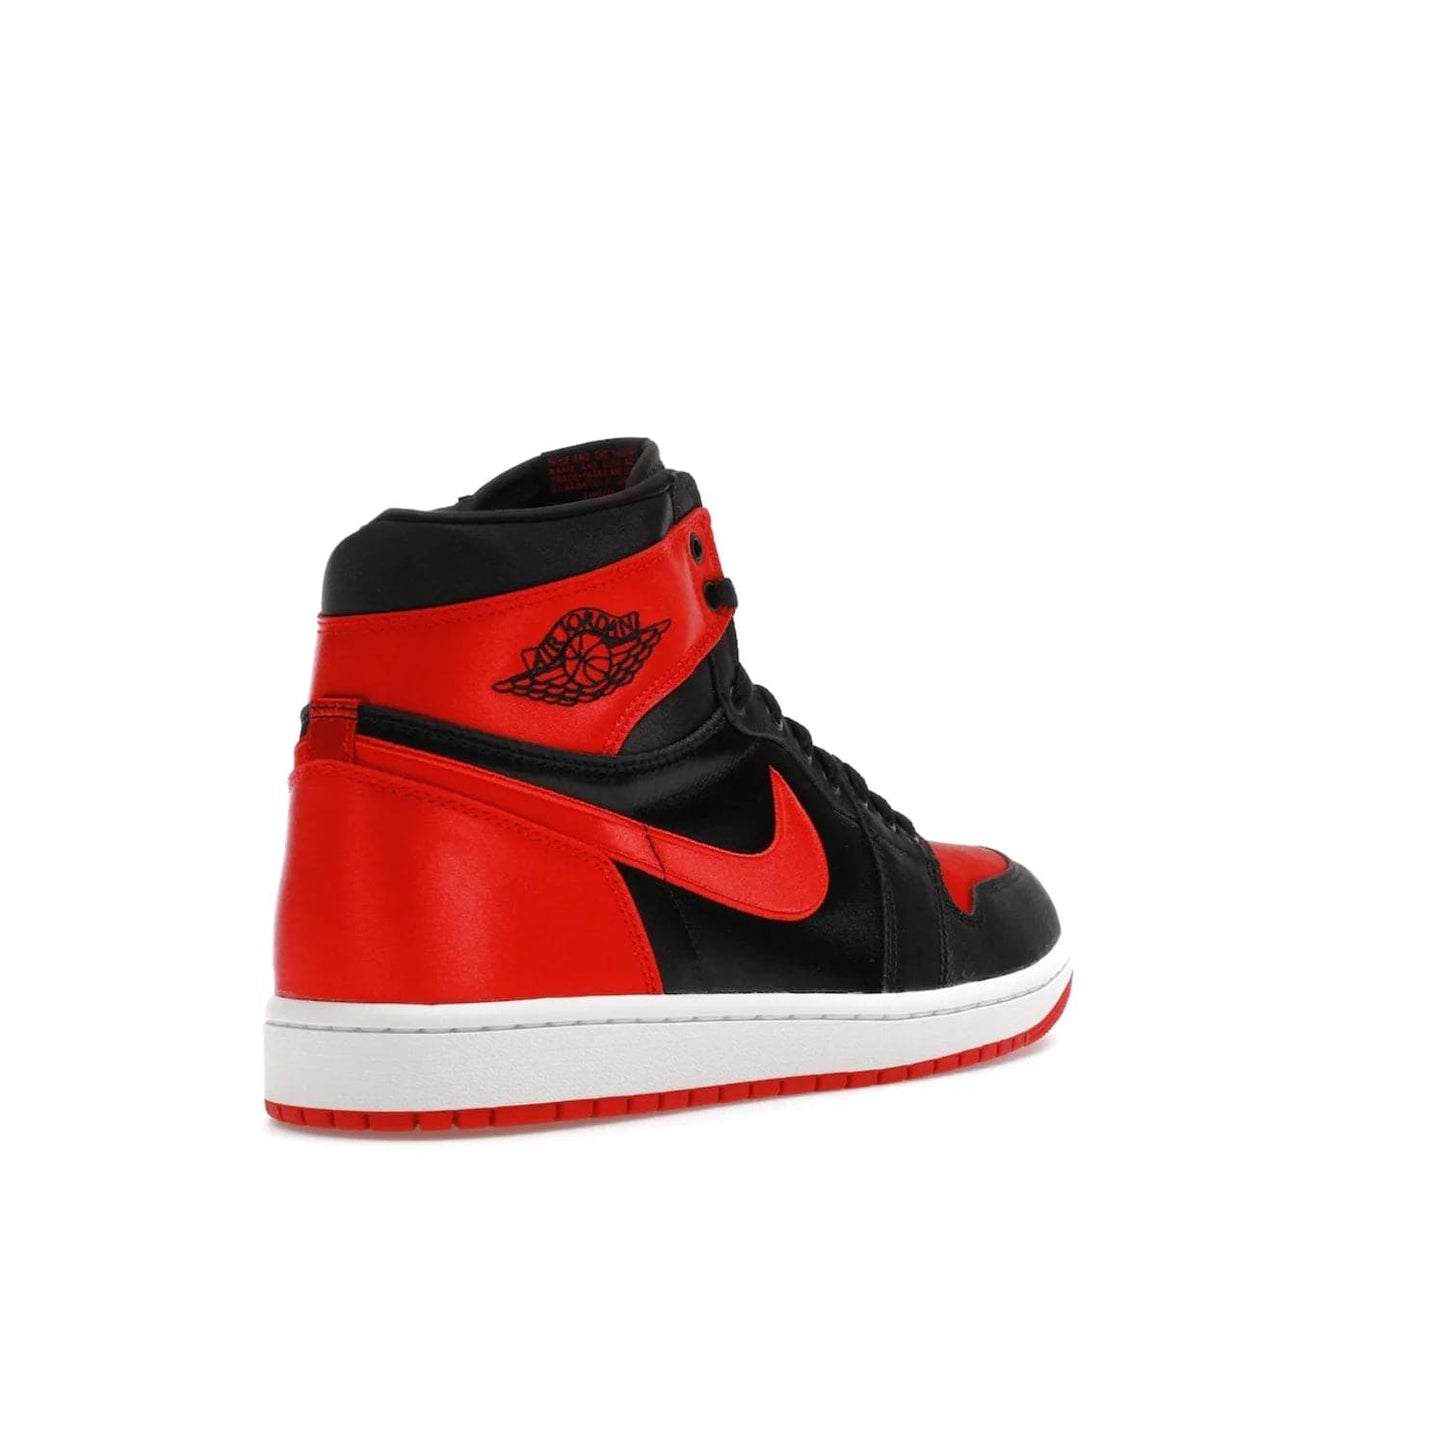 Jordan 1 Retro High OG Satin Bred (Women's) - Image 32 - Only at www.BallersClubKickz.com - Introducing the Jordan 1 Retro High OG Satin Bred (Women's). Luxe satin finish, contrasting hues & classic accents. Trending sneakers symbolizing timelessness & heritage. Make a bold statement with this iconic shoe. Available October 4, 2023.